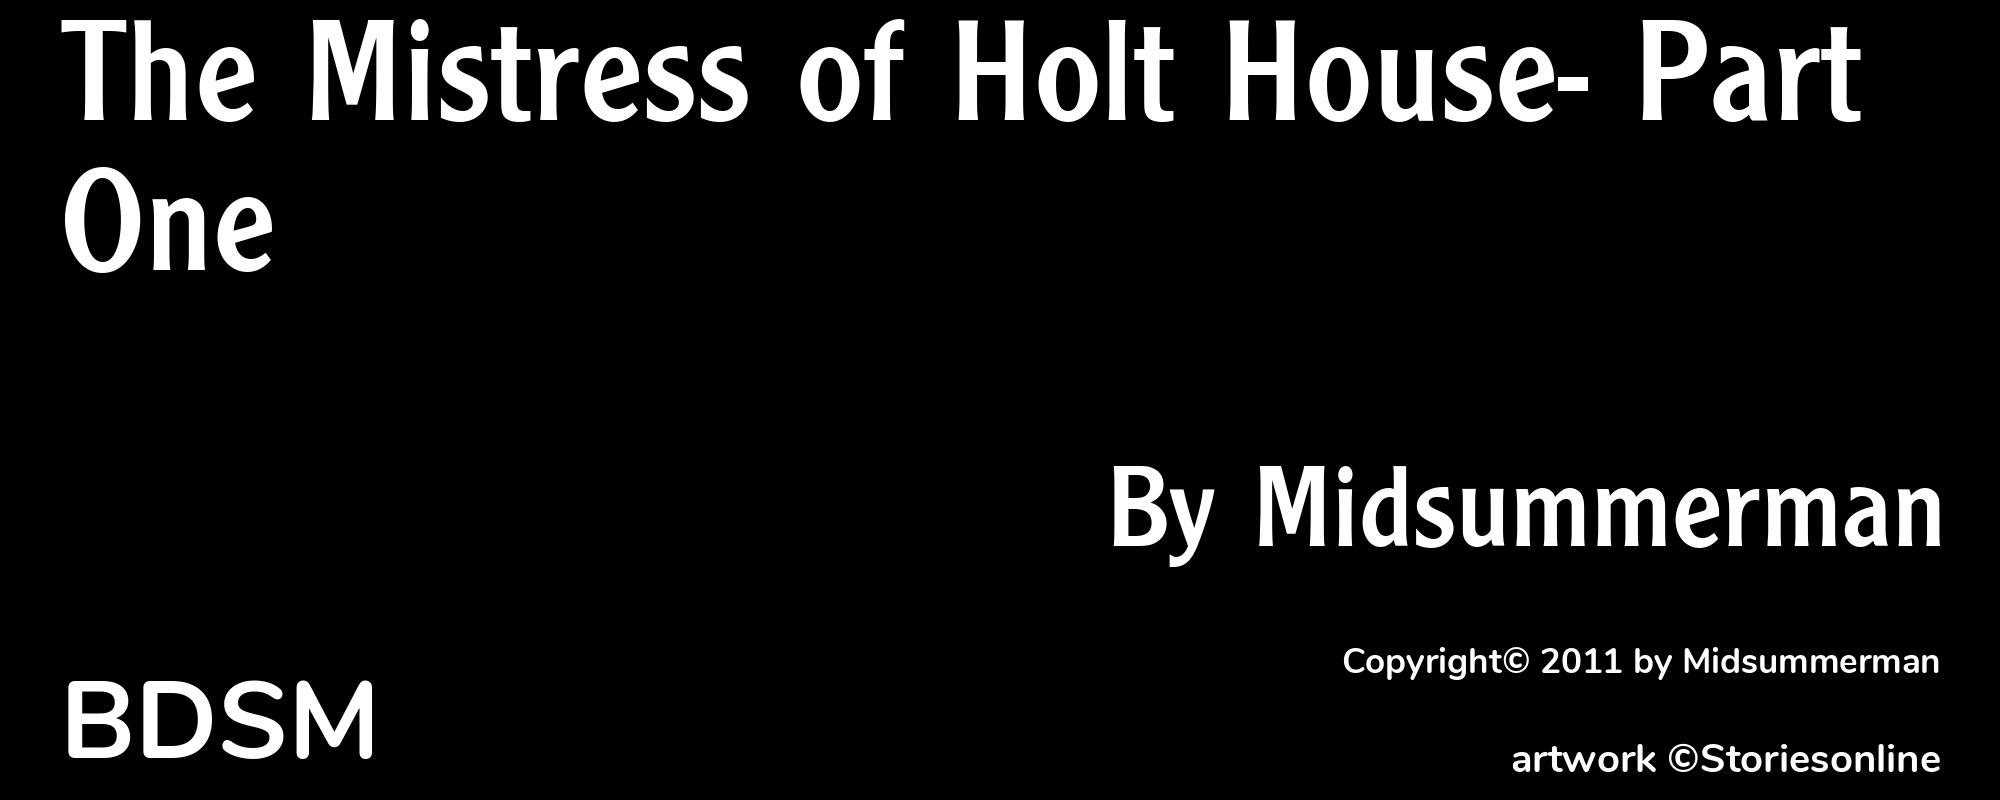 The Mistress of Holt House- Part One - Cover